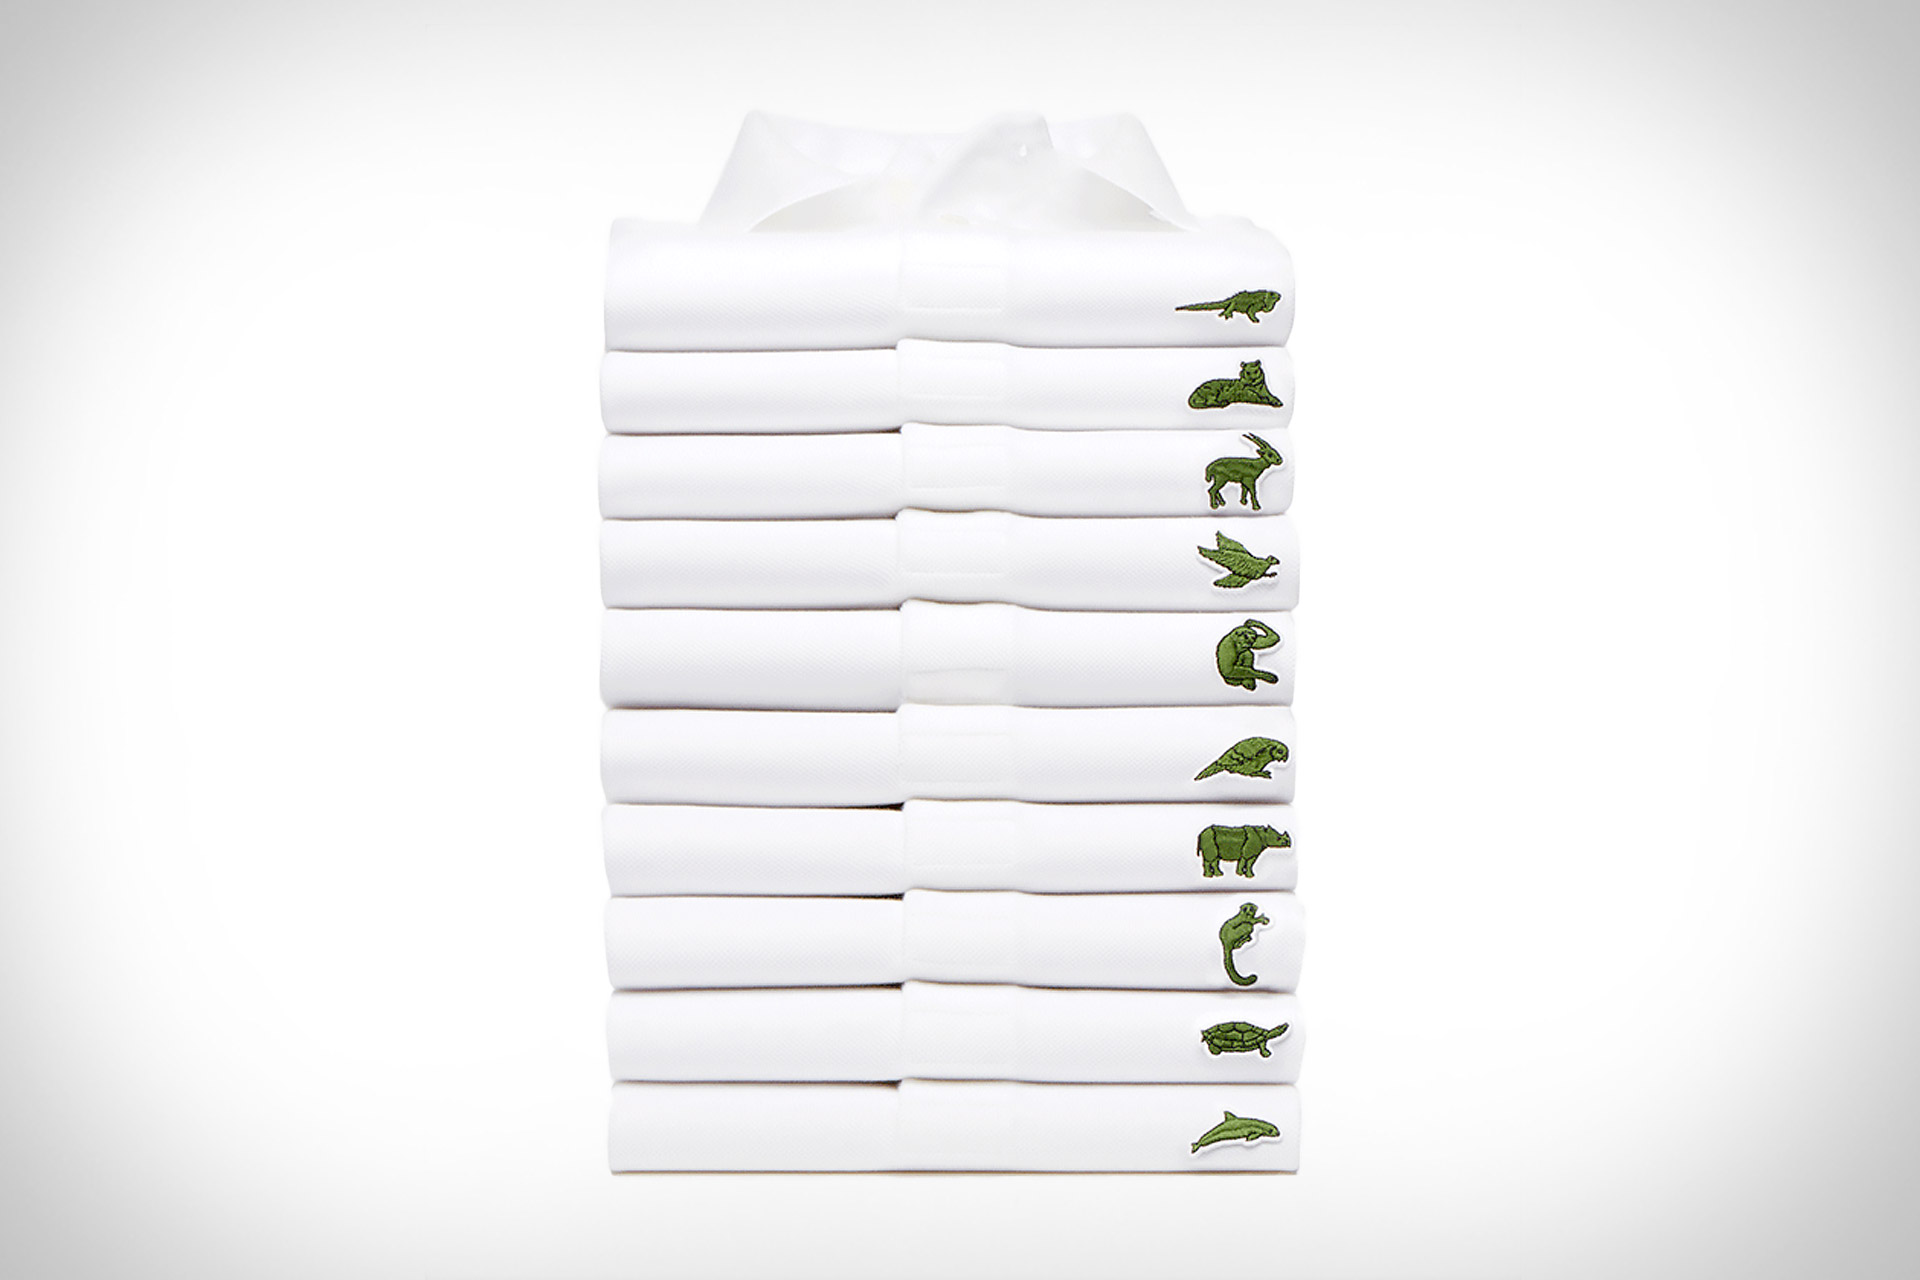 Lacoste Save Our Species Collection 